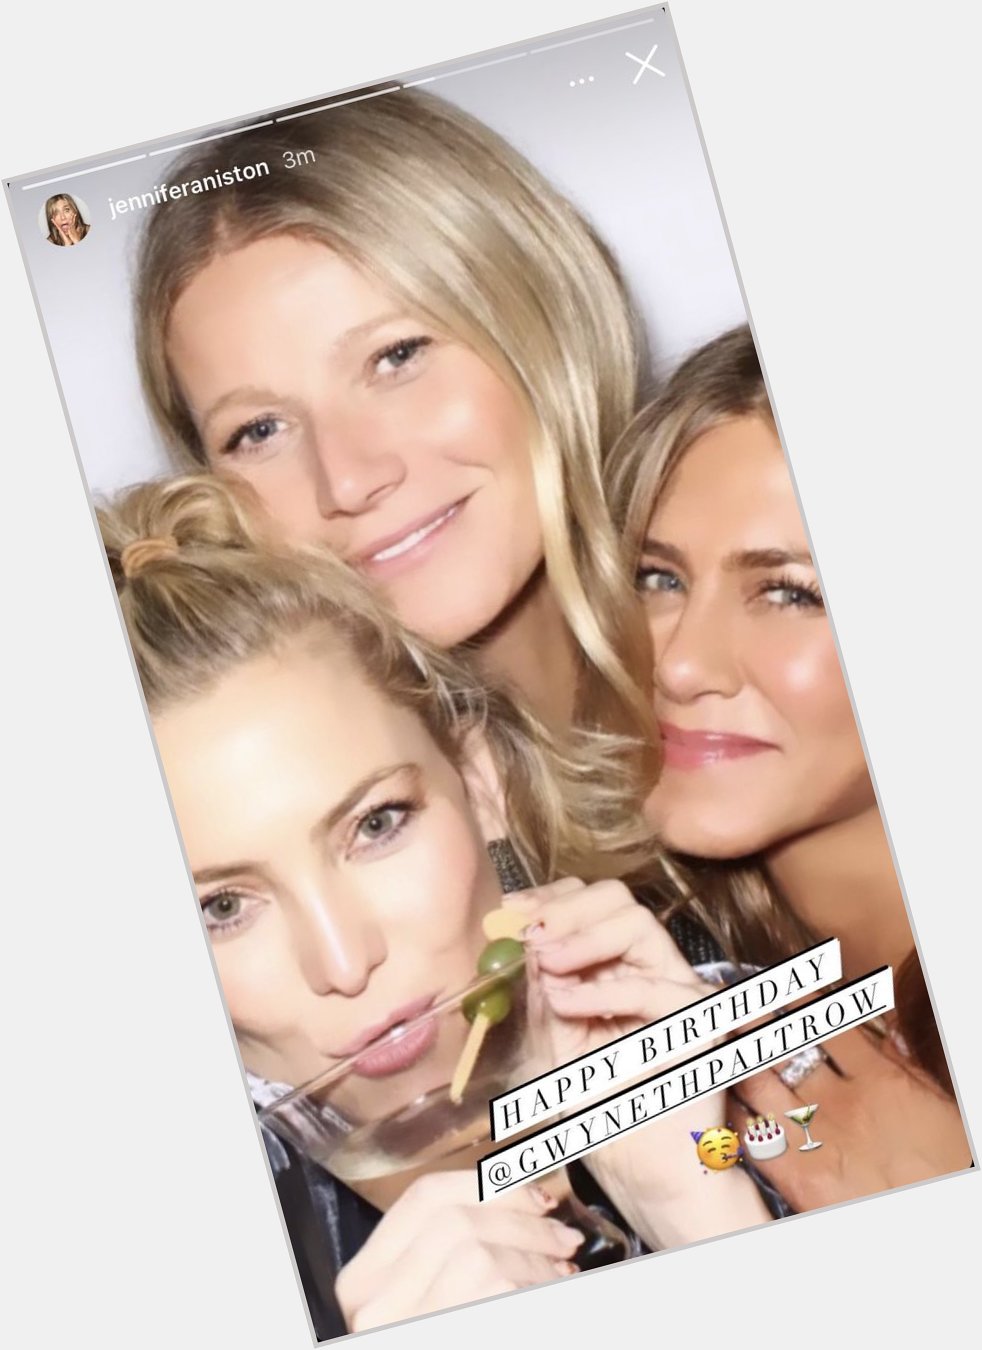 This is so cute aweee happy birthday to gwyneth paltrow! 